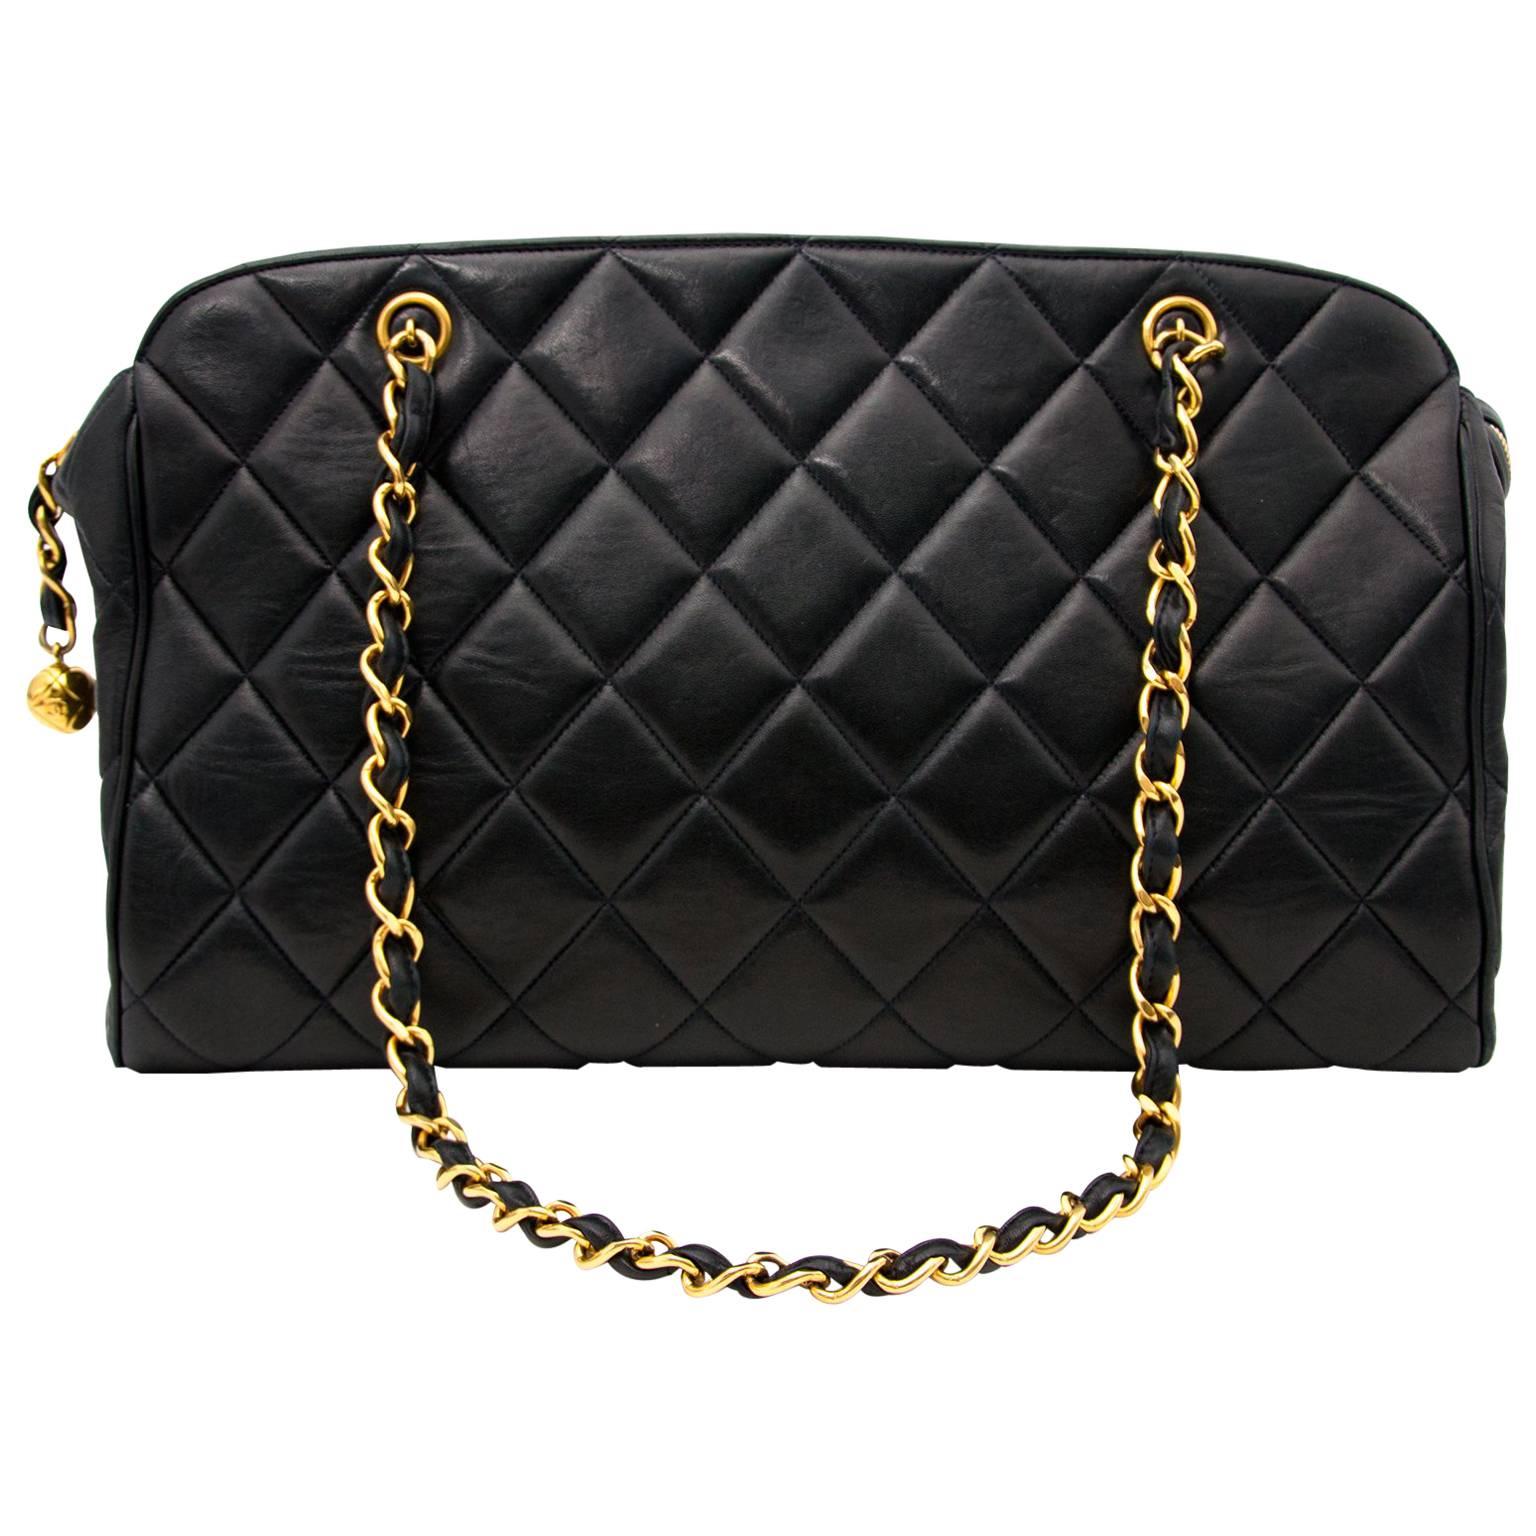 Chanel Navy Quilted Leather Shopper